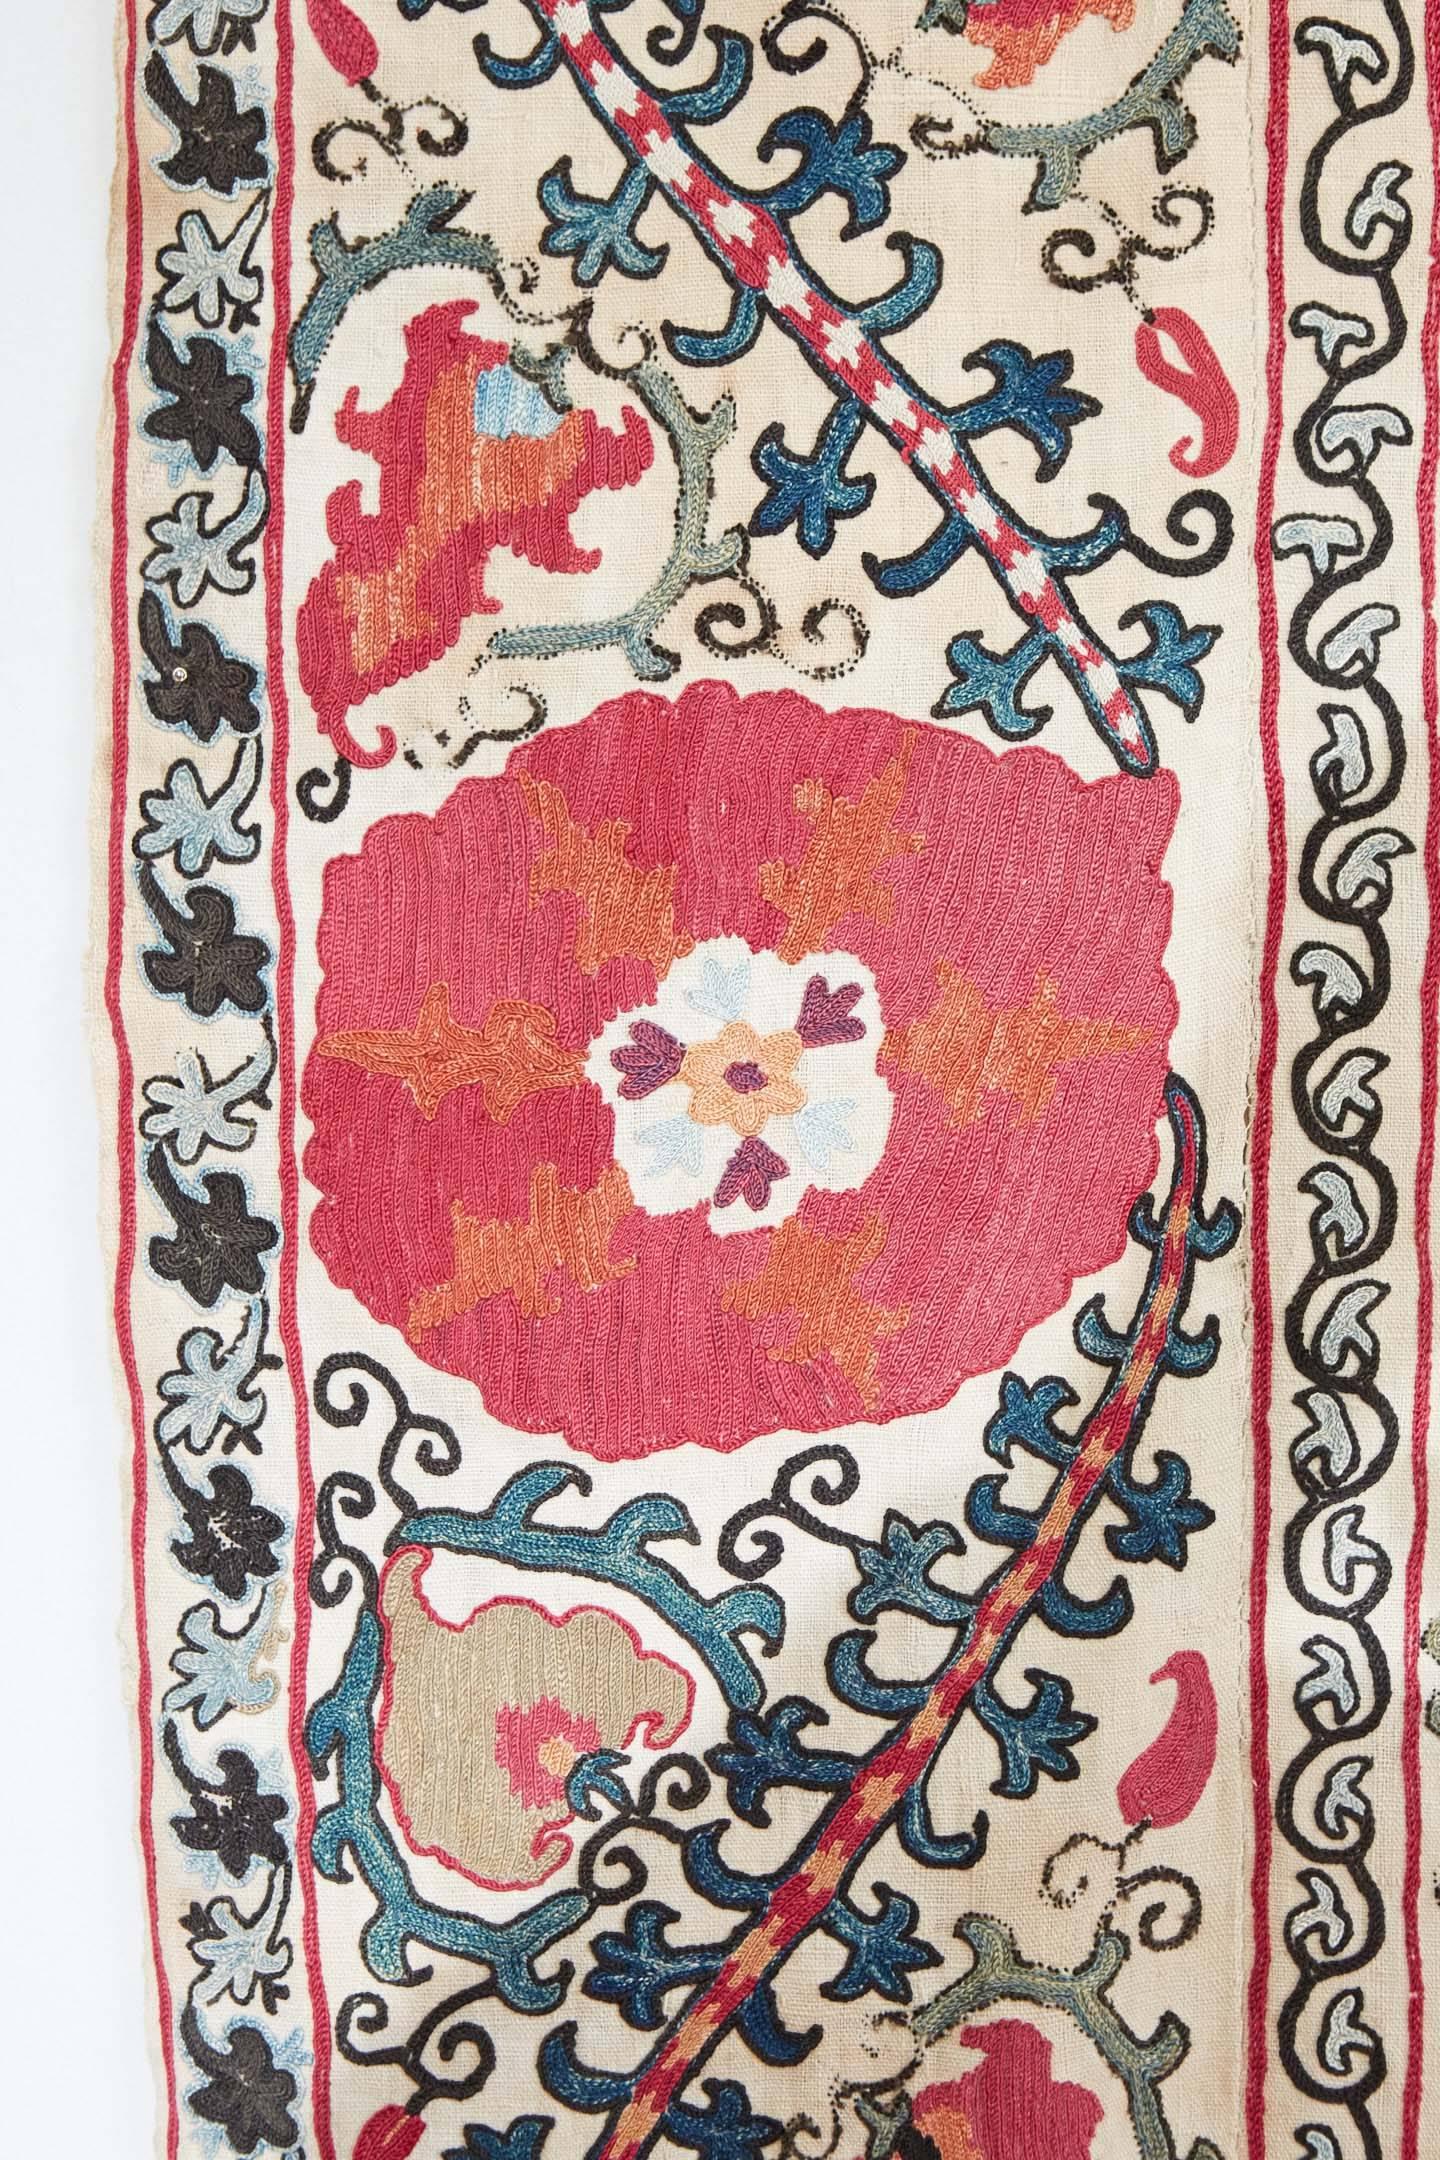 Embroidered Antique Bukhara Suzani Textile with Oranges and Pinks